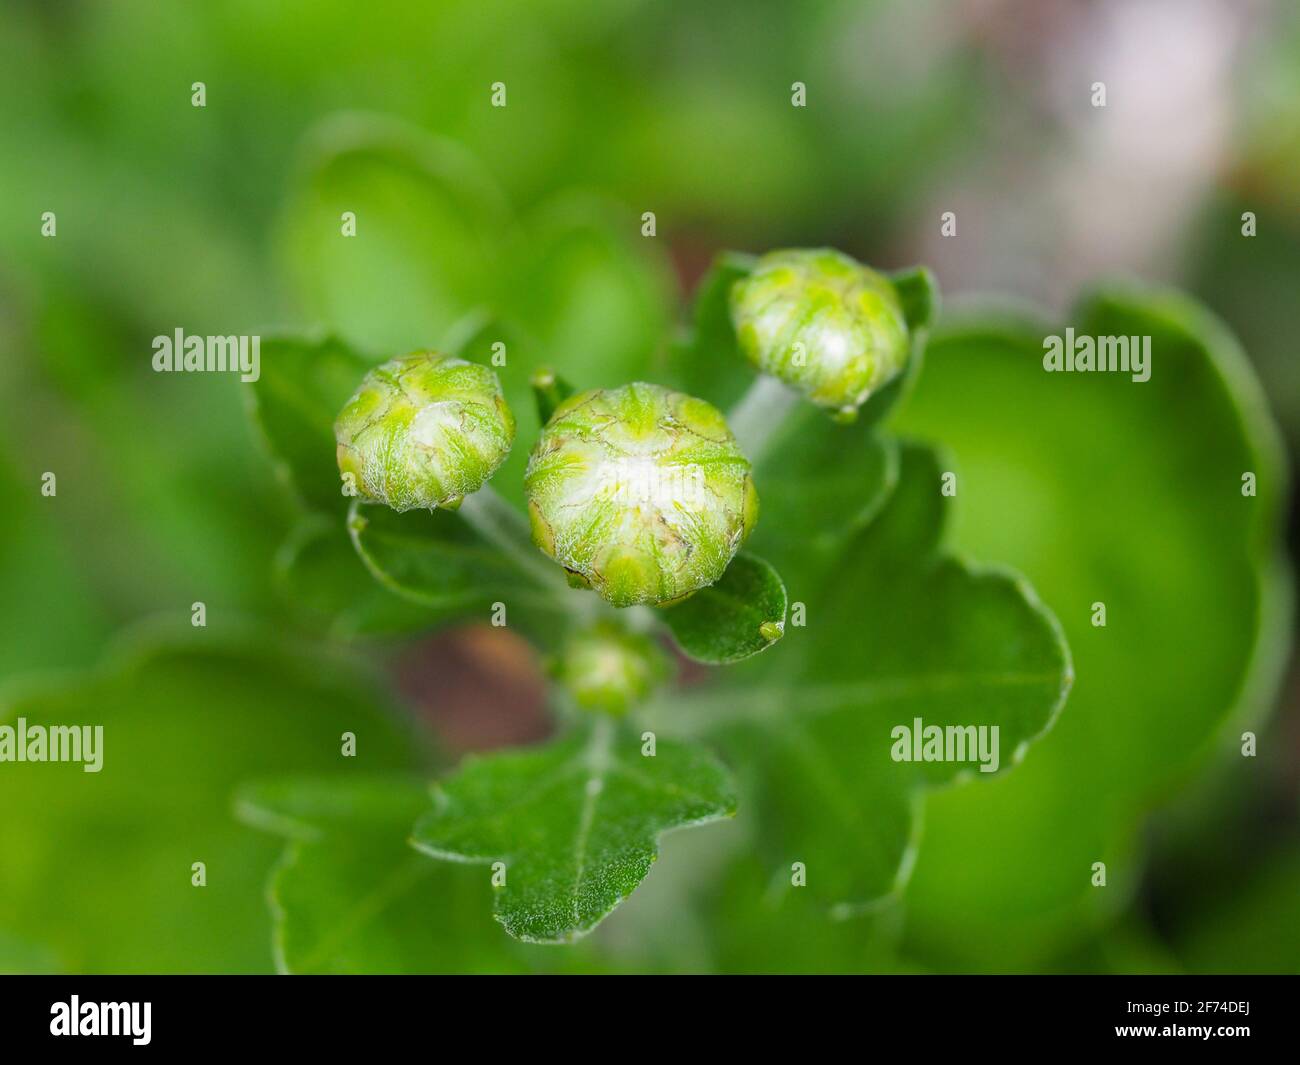 About to bloom, A trio of Chrysanthemum buds and blurred green foliage background, in the garden Stock Photo